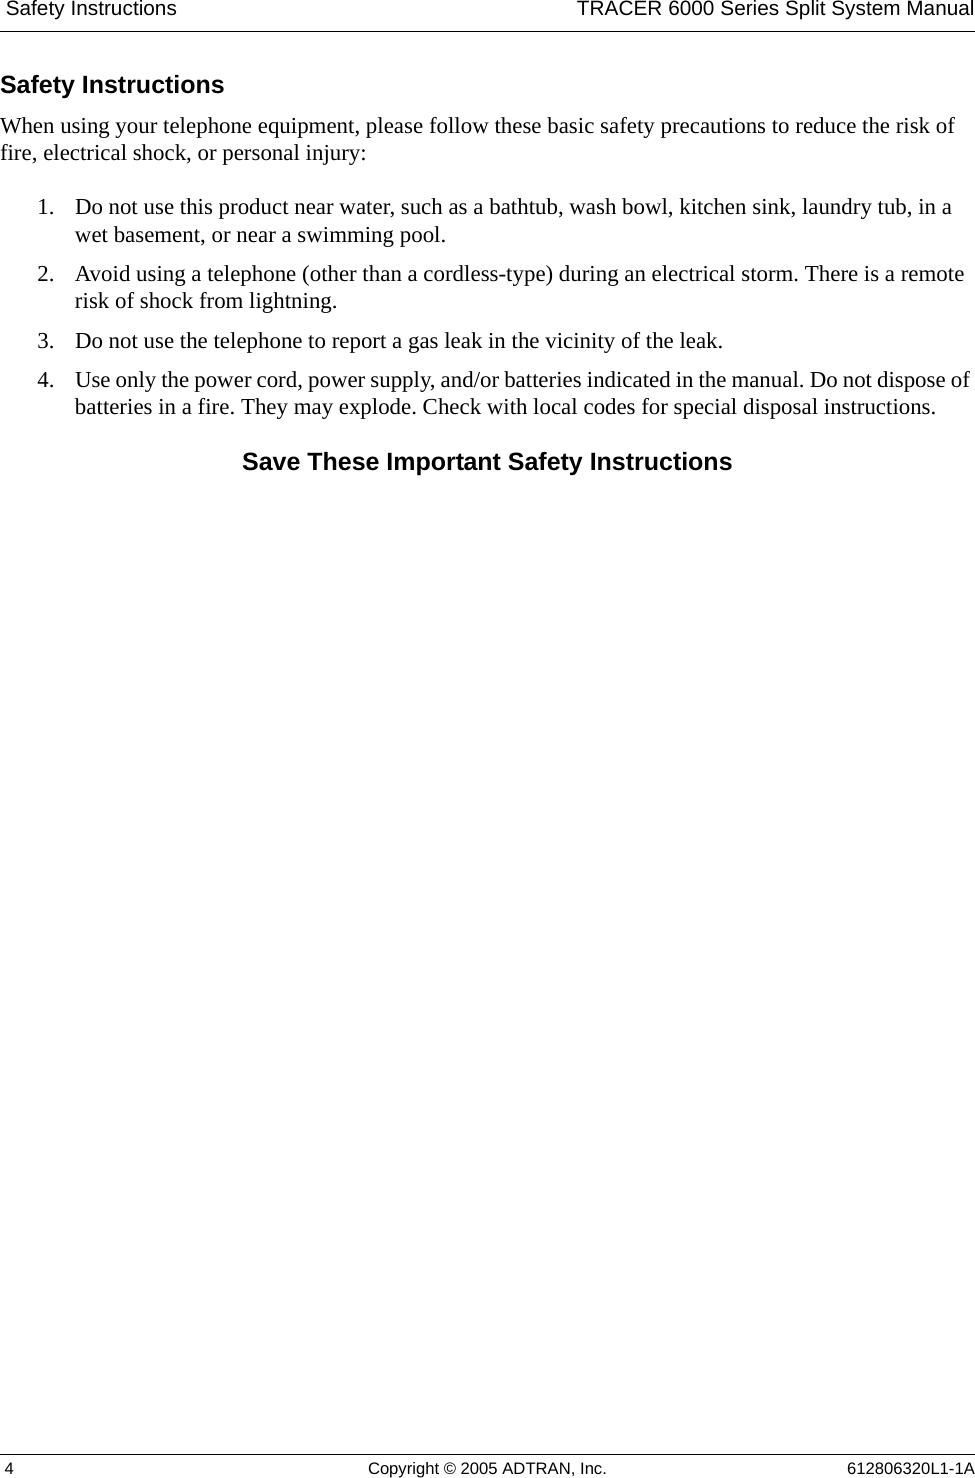  Safety Instructions TRACER 6000 Series Split System Manual 4 Copyright © 2005 ADTRAN, Inc. 612806320L1-1ASafety InstructionsWhen using your telephone equipment, please follow these basic safety precautions to reduce the risk of fire, electrical shock, or personal injury:1. Do not use this product near water, such as a bathtub, wash bowl, kitchen sink, laundry tub, in a wet basement, or near a swimming pool.2. Avoid using a telephone (other than a cordless-type) during an electrical storm. There is a remote risk of shock from lightning.3. Do not use the telephone to report a gas leak in the vicinity of the leak.4. Use only the power cord, power supply, and/or batteries indicated in the manual. Do not dispose of batteries in a fire. They may explode. Check with local codes for special disposal instructions.Save These Important Safety Instructions